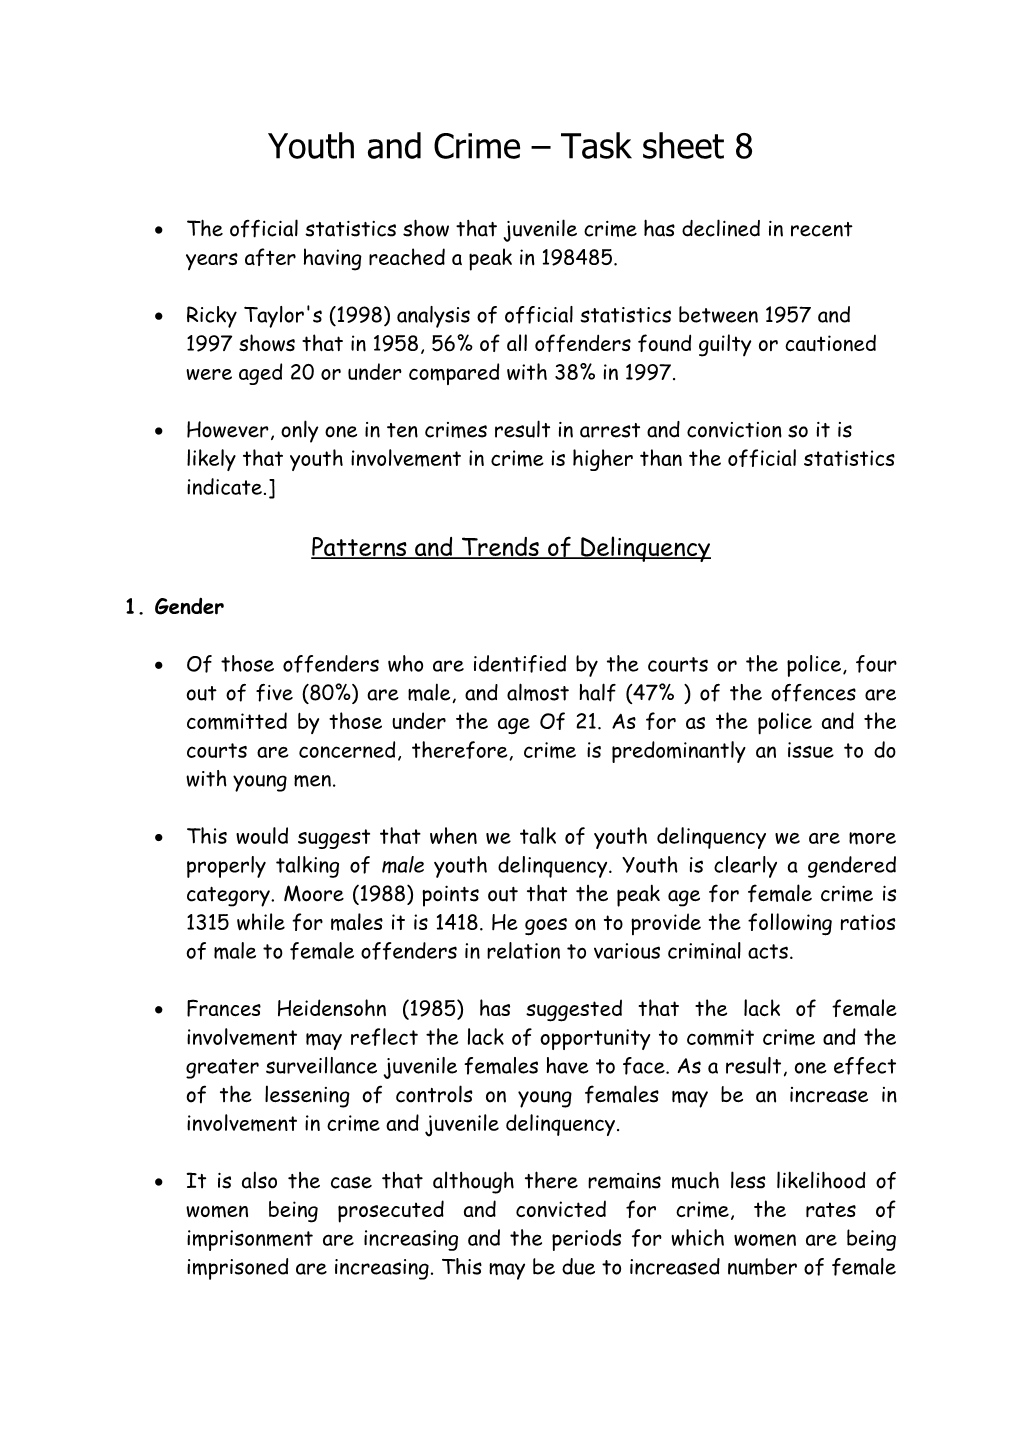 Youth and Crime Task Sheet 8